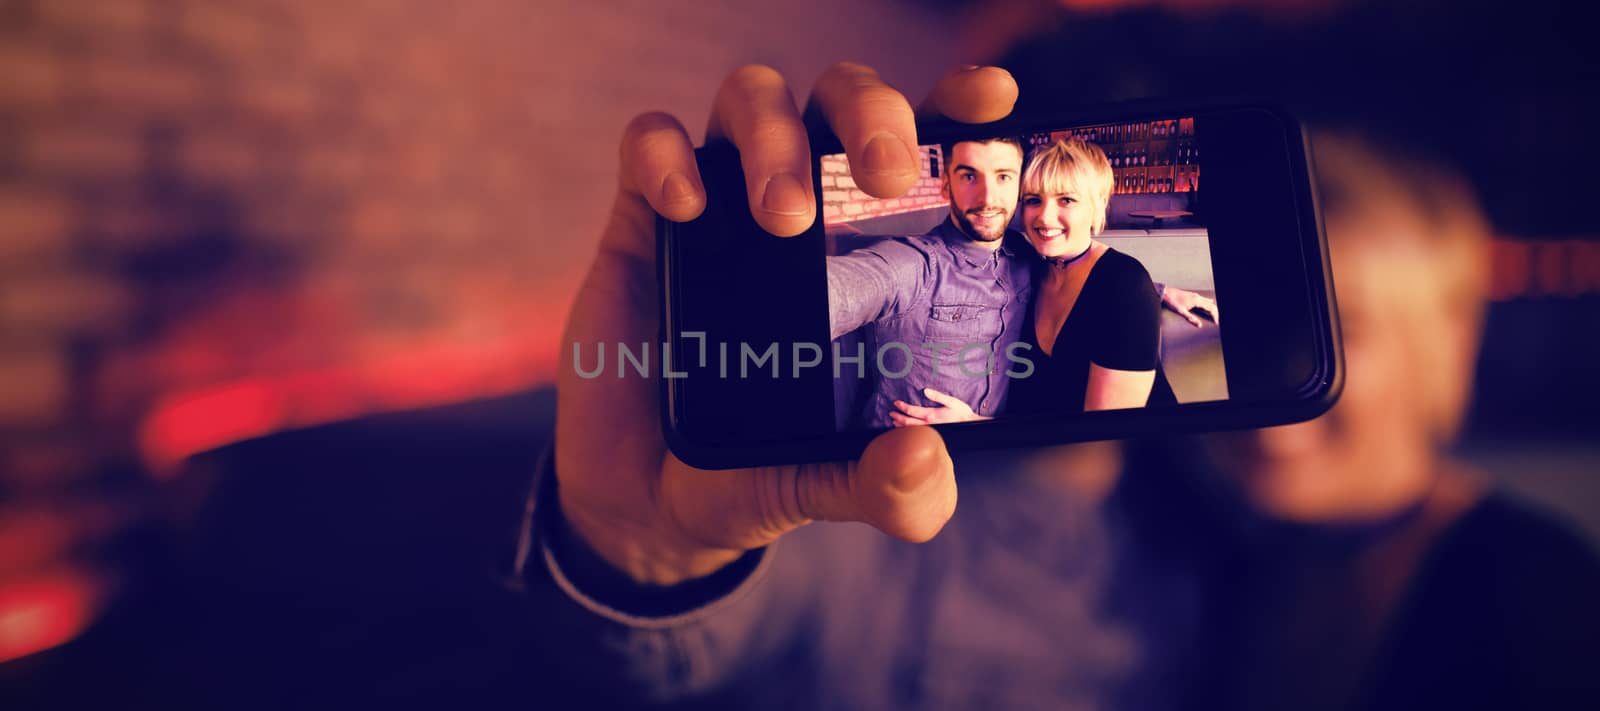 Smiling couple taking selfie on mobile phone in bar